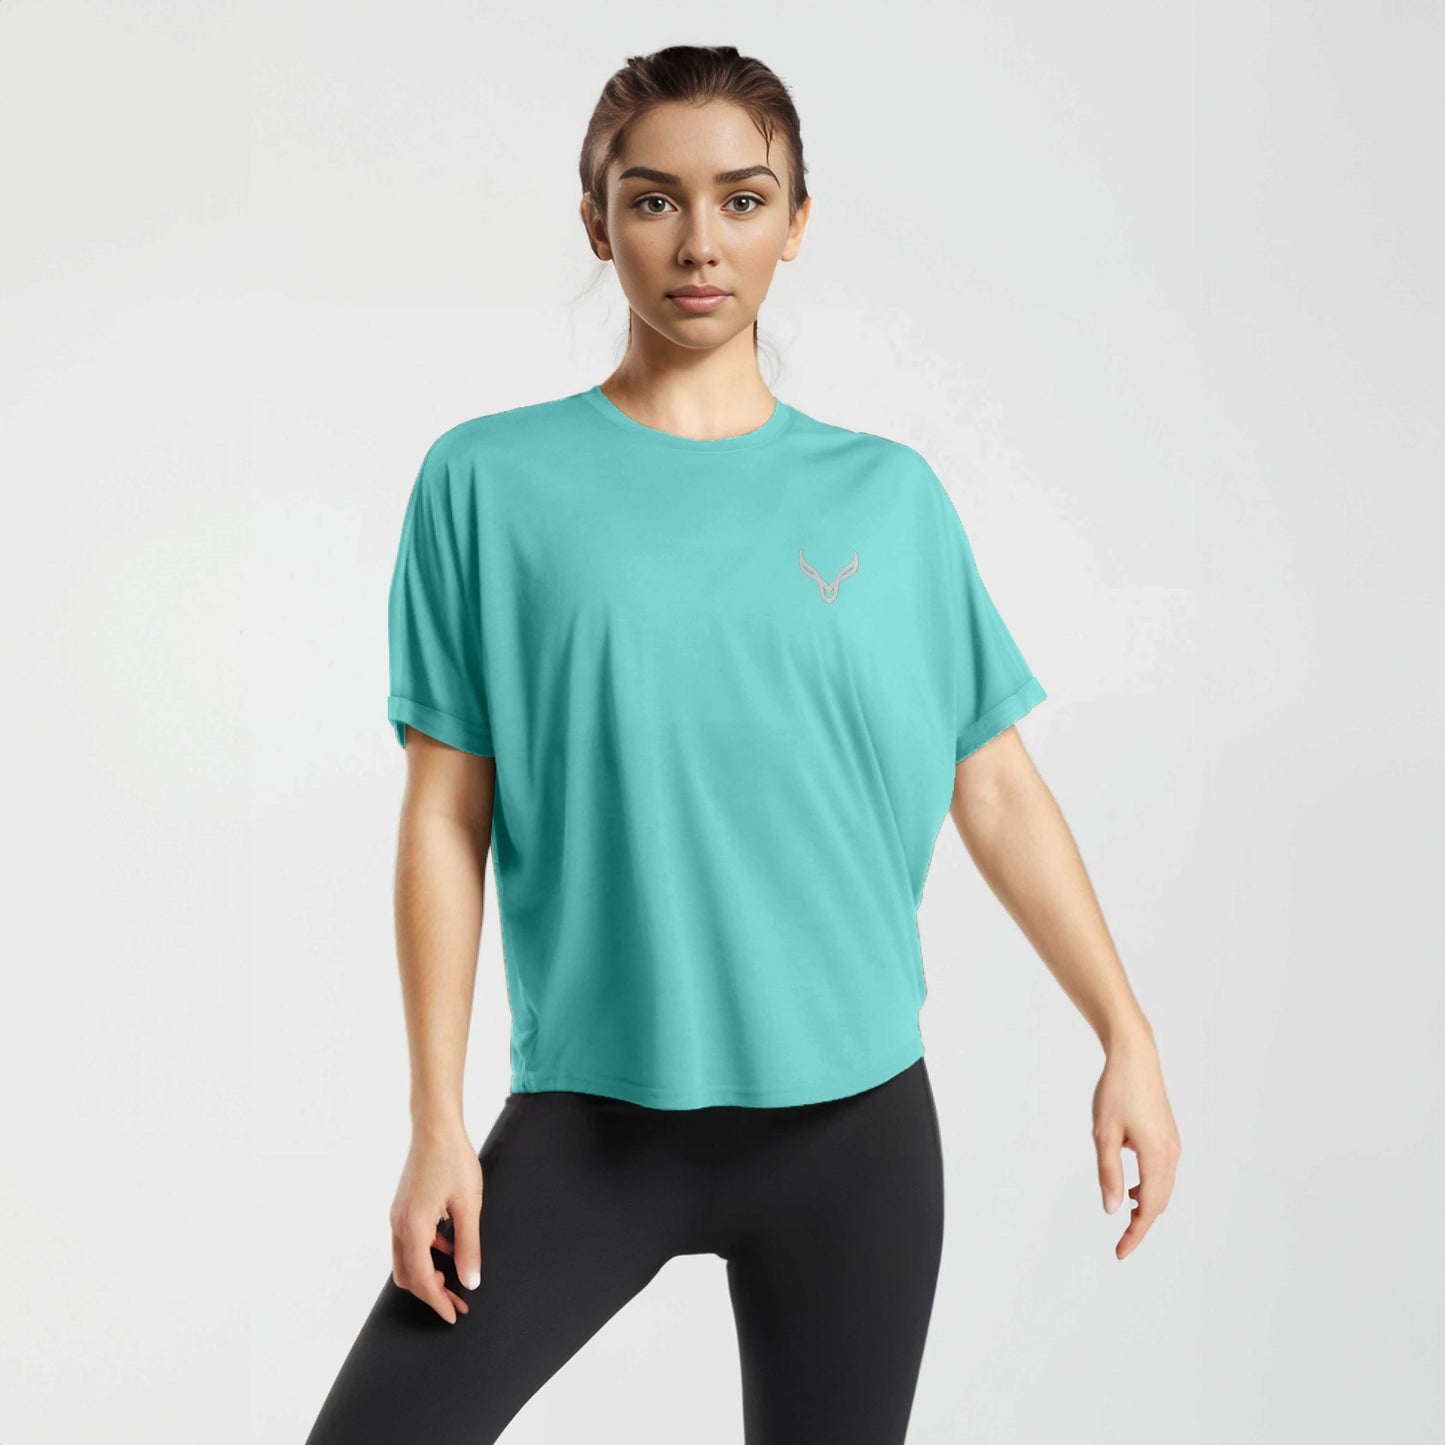 Polo Athletica Women's Baggy Style Seamless Sleeve Activewear Tee Shirt Women's Tee Shirt Polo Republica Turquoise XS 